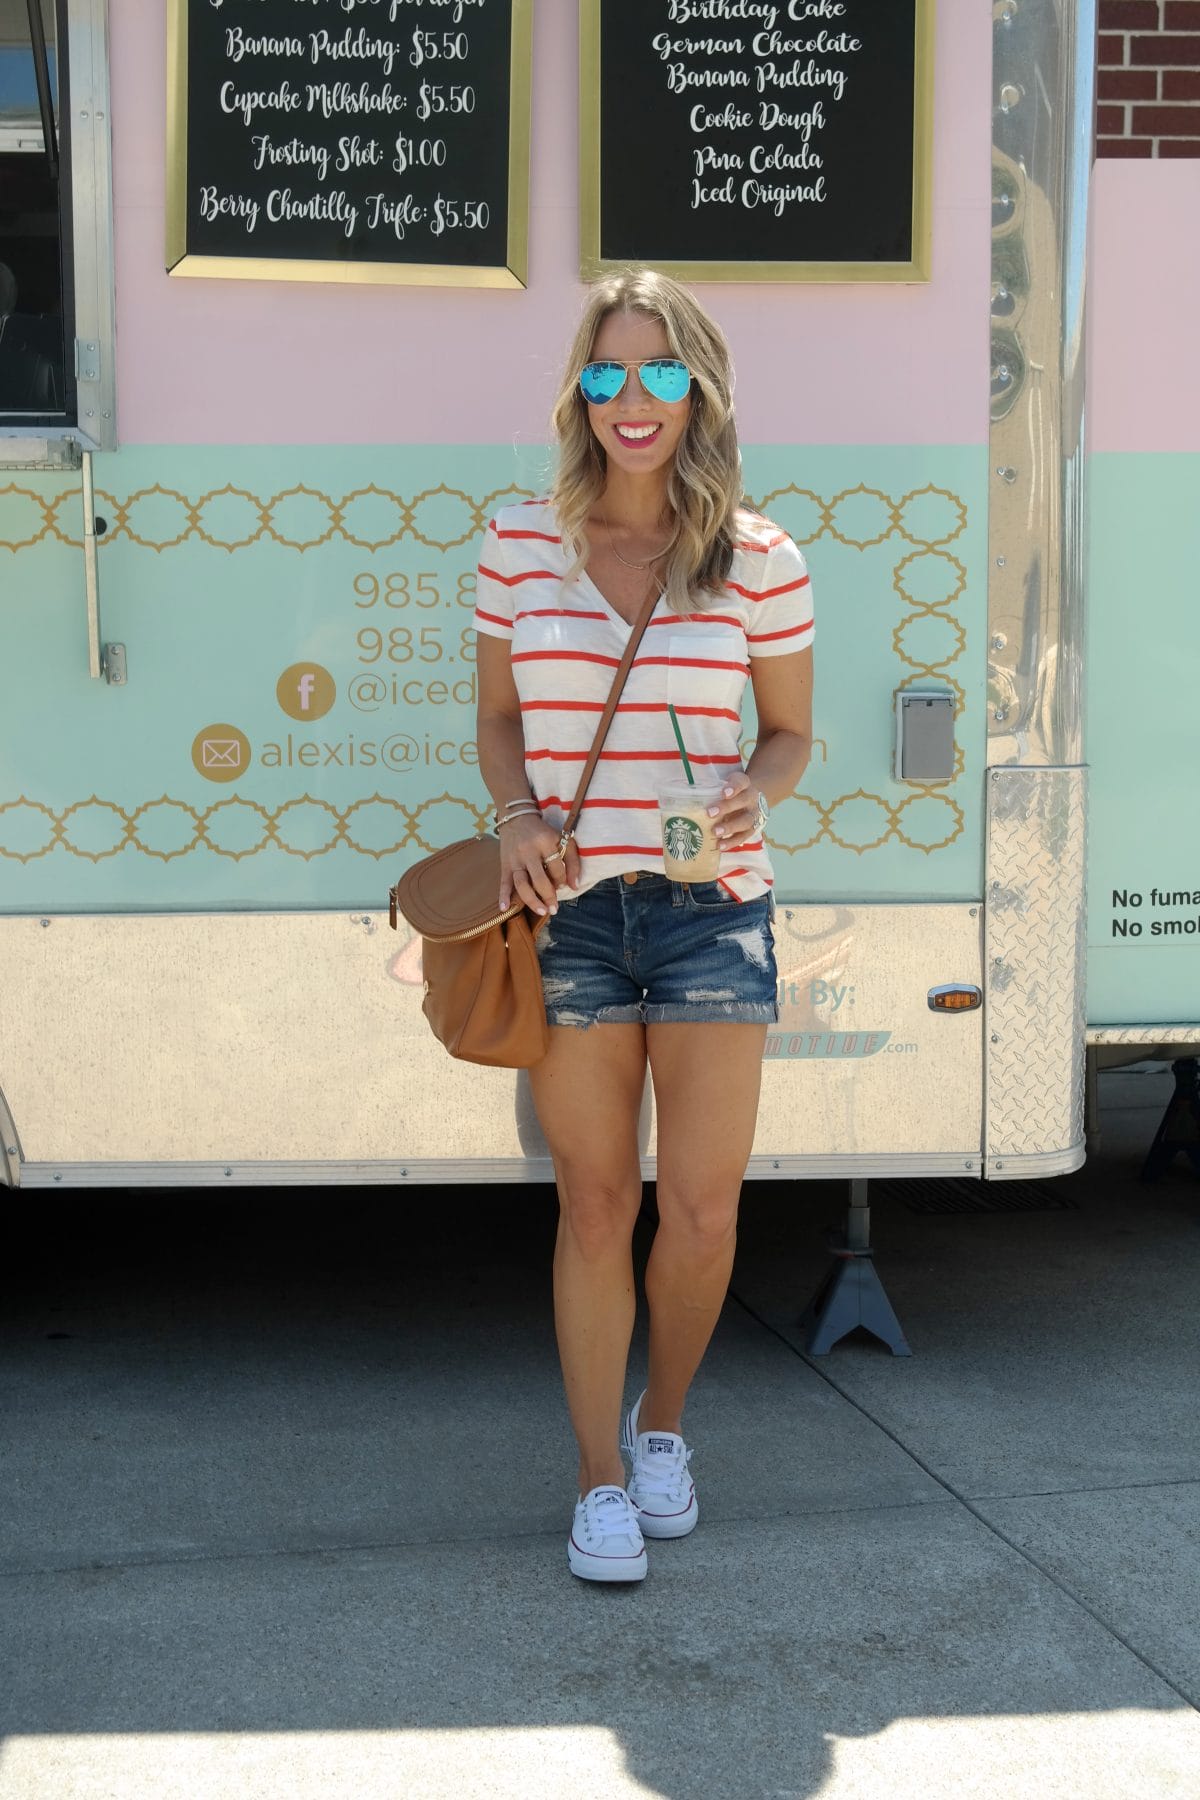 Spring outfit - Striped v-neck t shirt and jean shorts